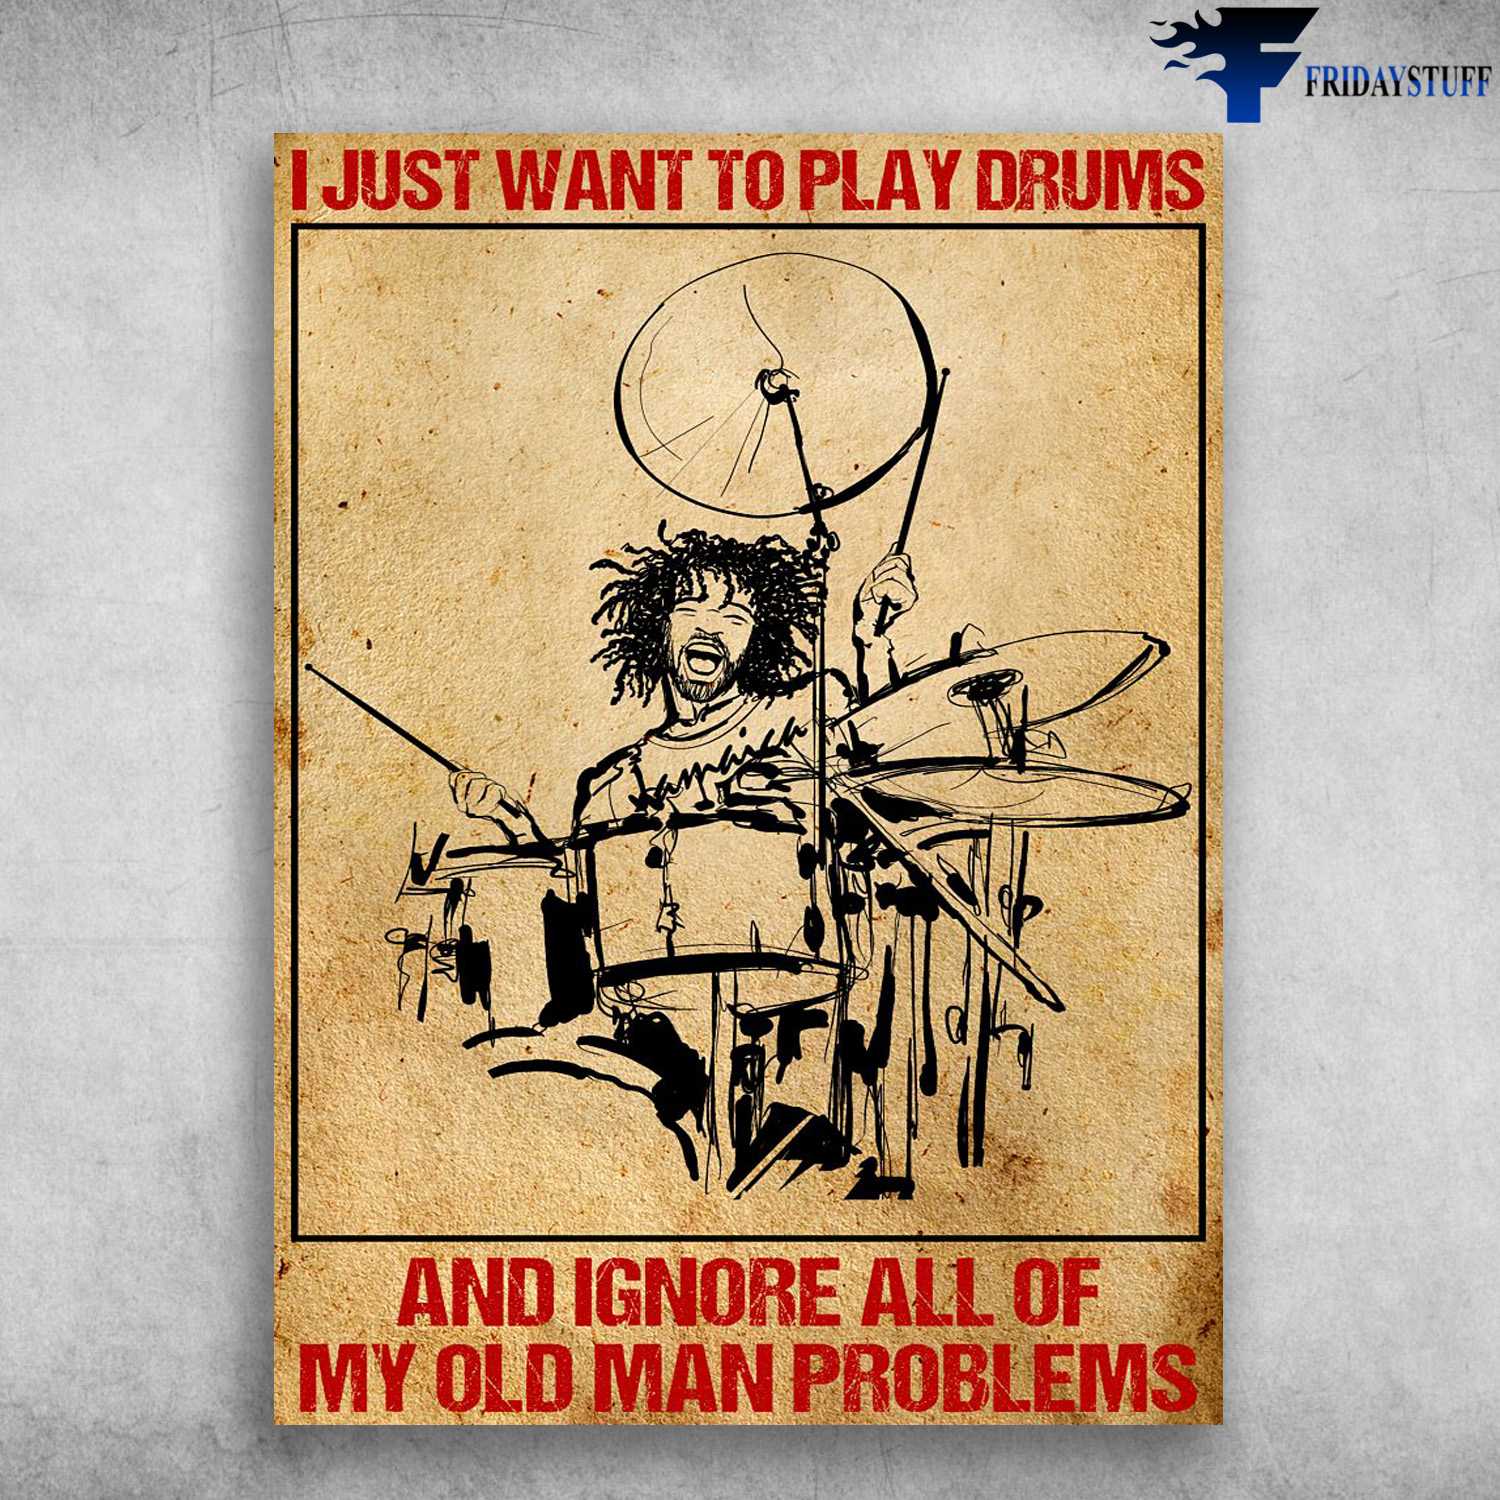 Drum Lover, I Just Wannt To Play Drums, And Ignore All Of, My Old Man Problems